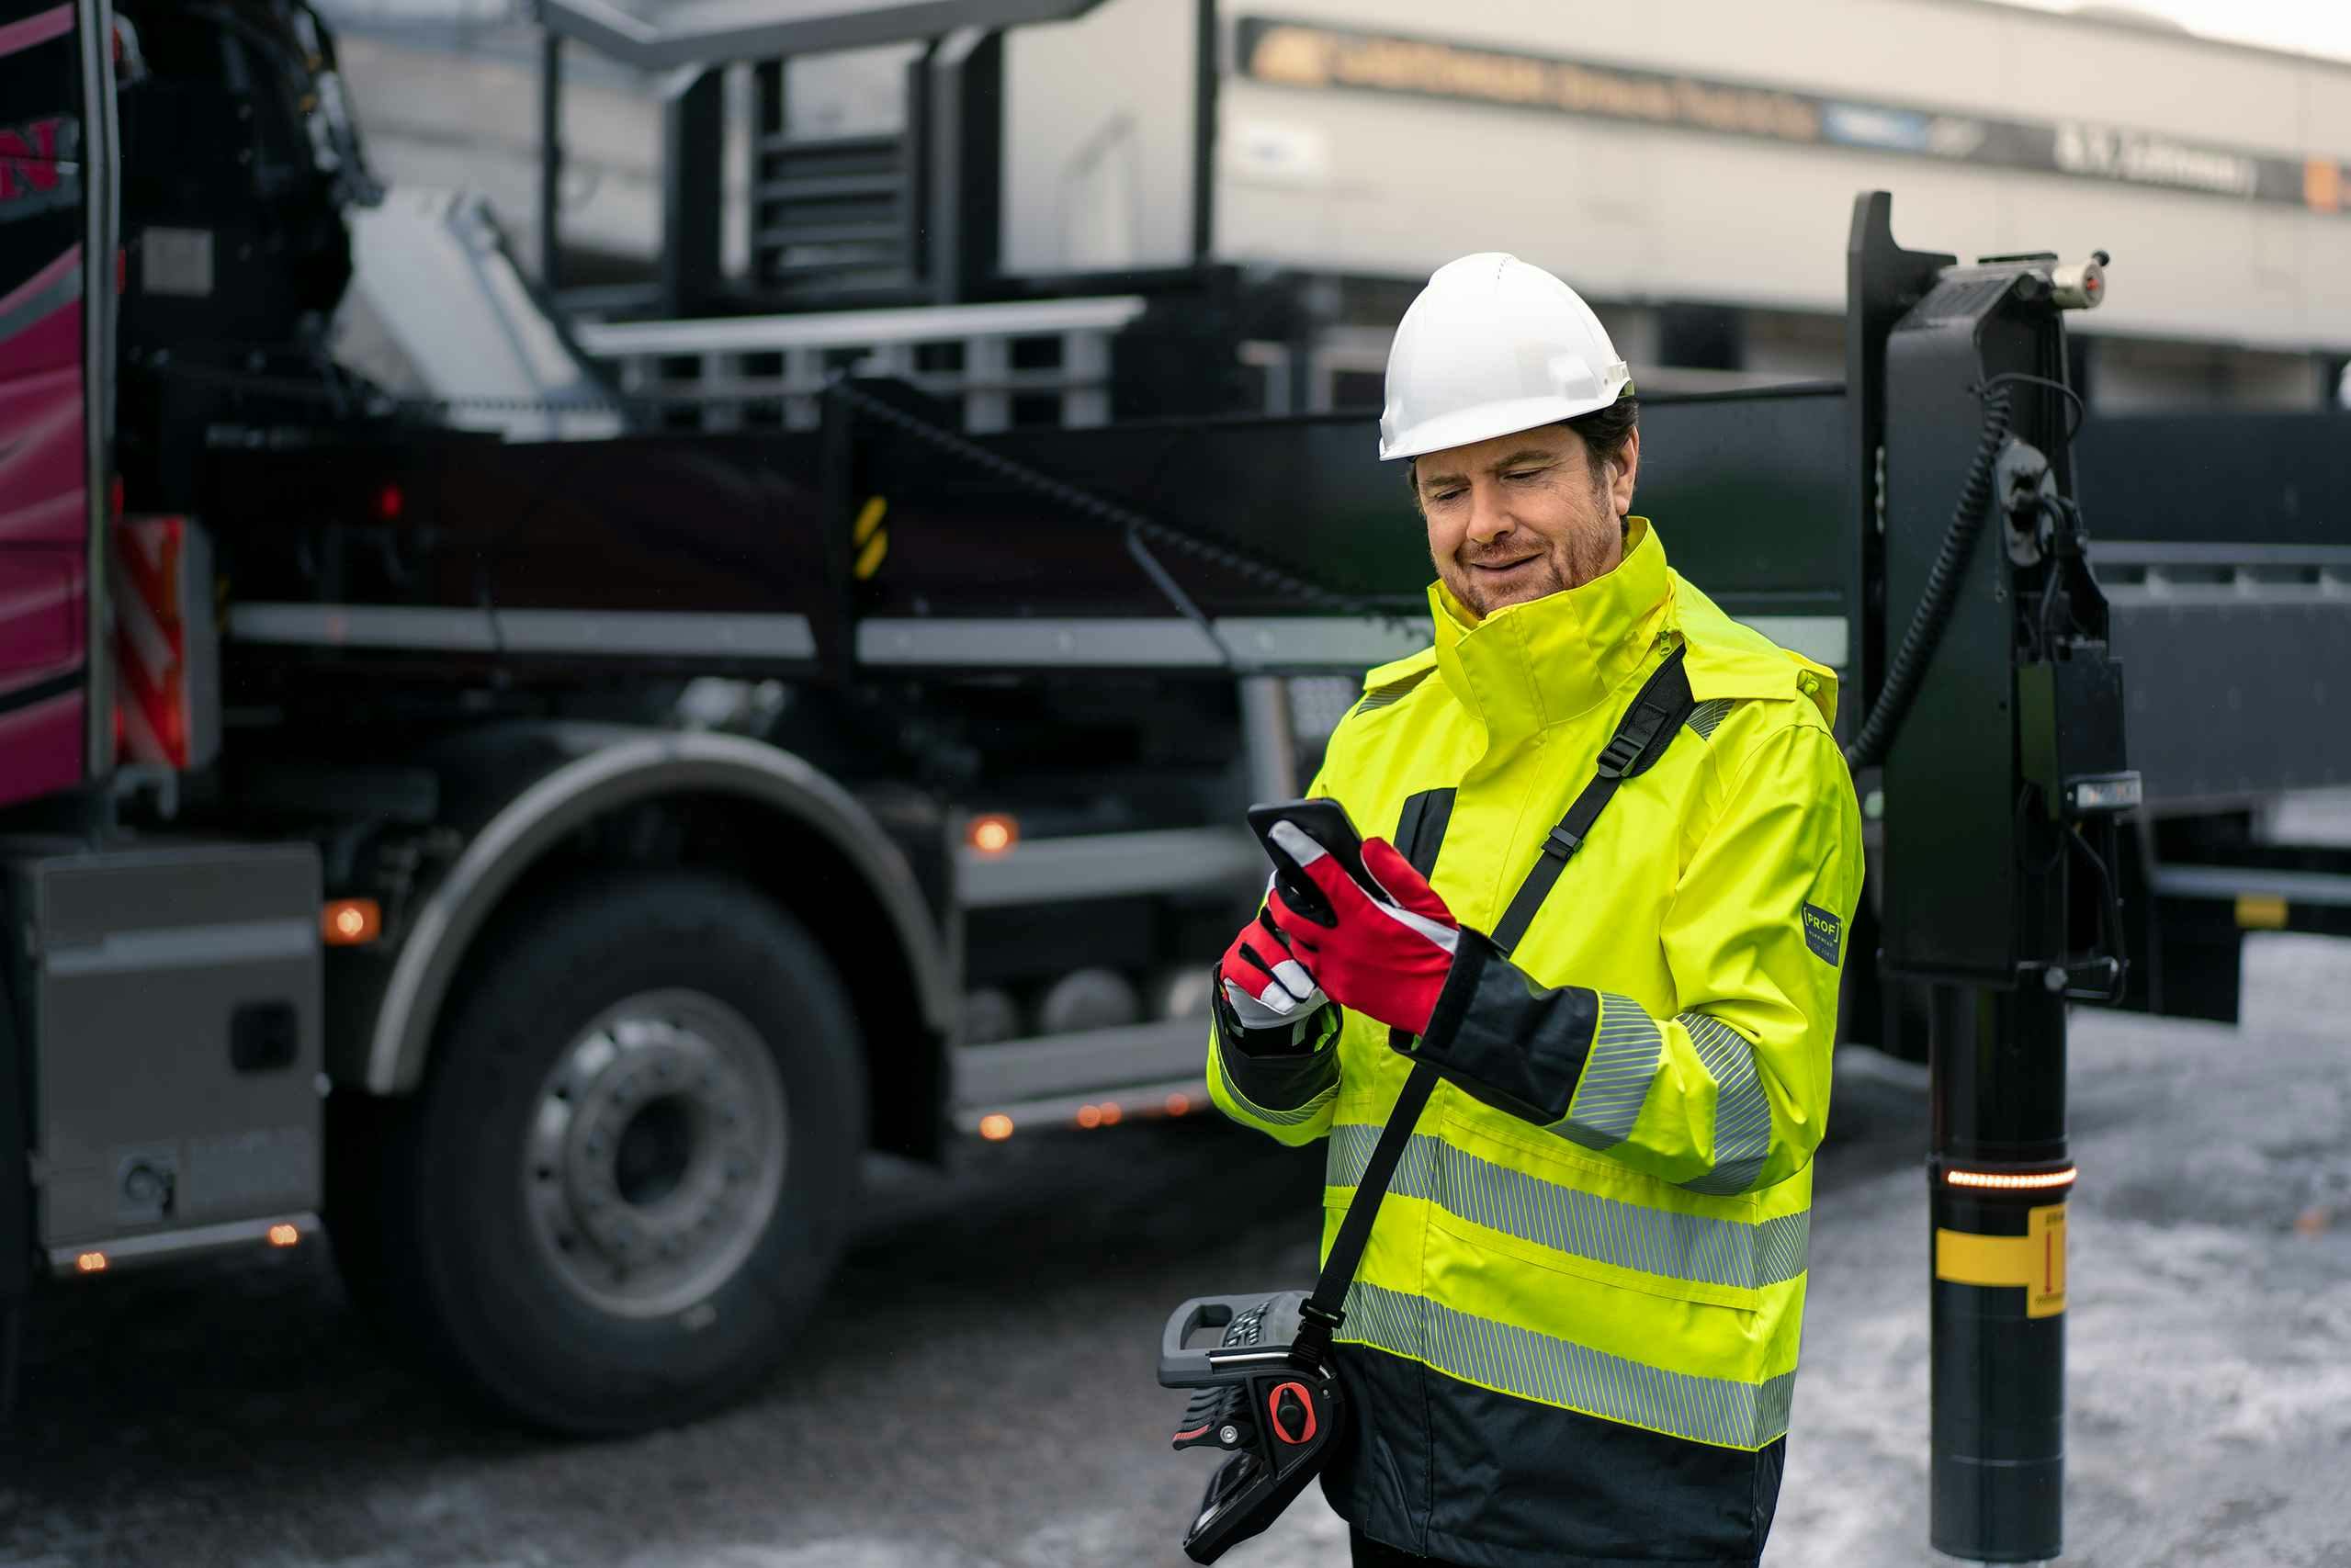 Hiab Introduces MyHiab Mobile App to Enhance Operator Efficiency and Safety